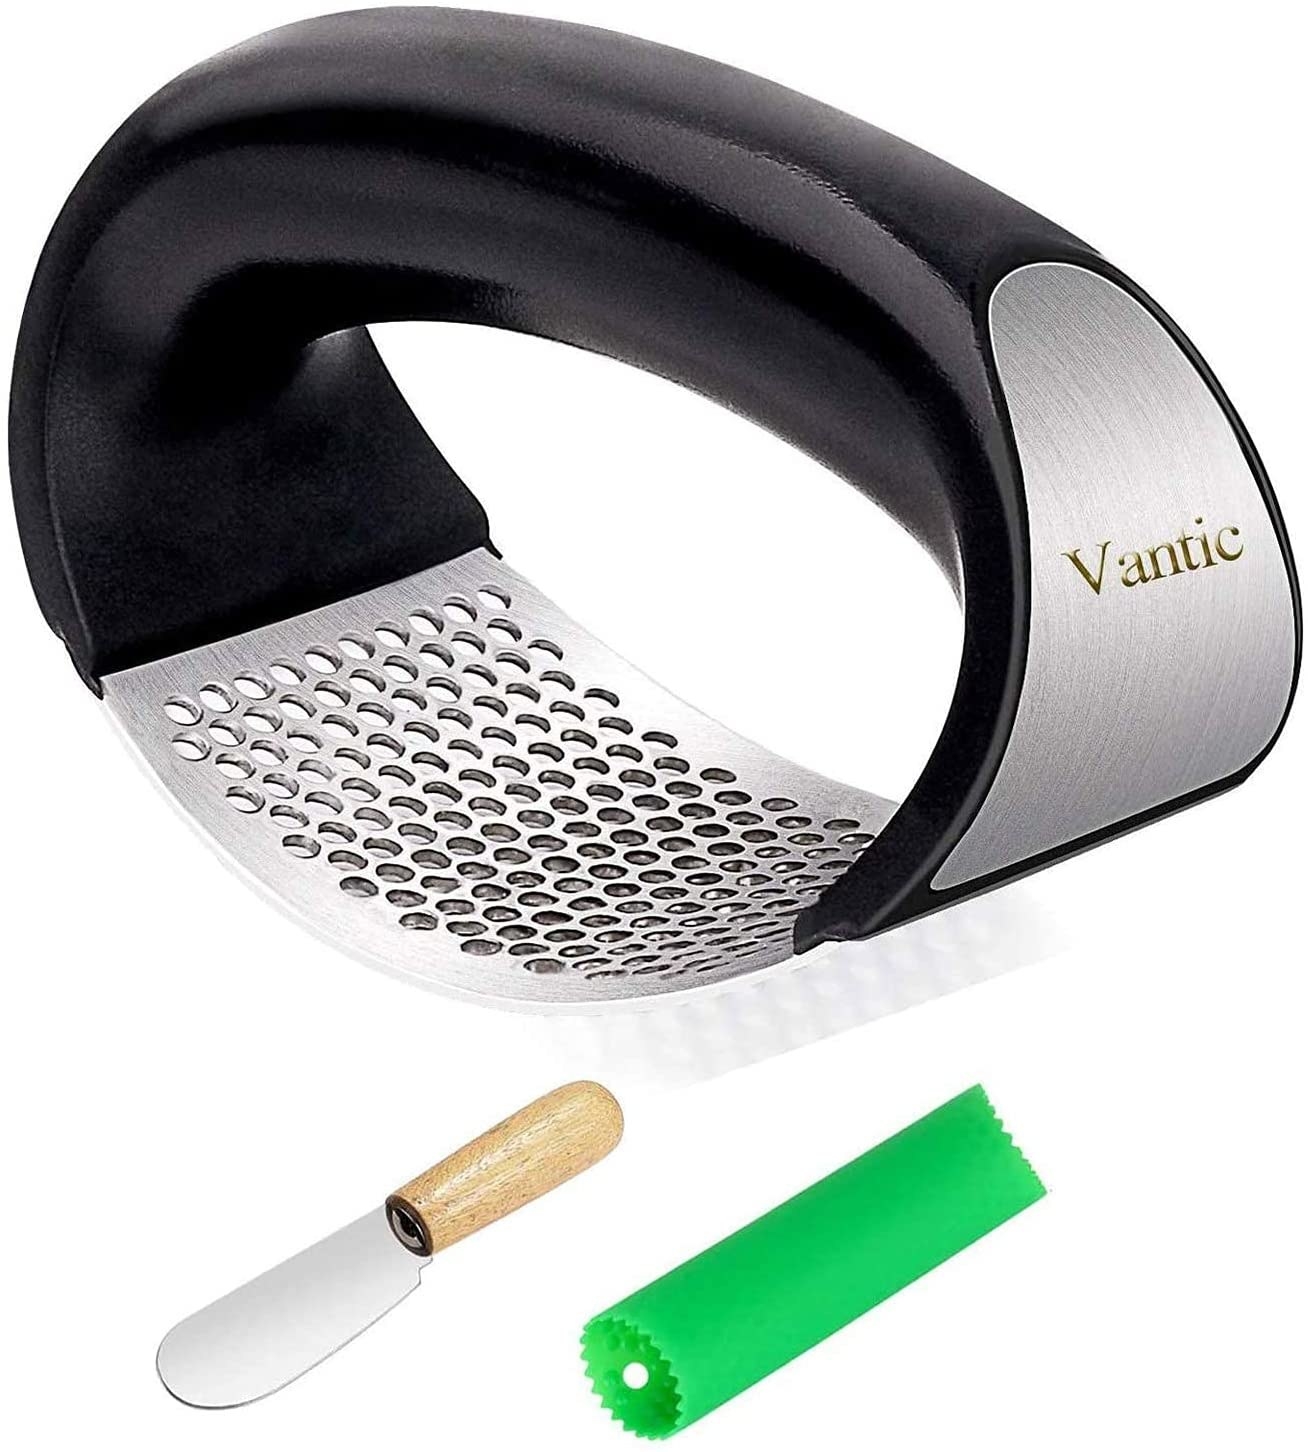 Cleaning Brush Included Silicone Tube Peeler Stainless Steel Mincer and Crusher with Garlic Rocker and Peeler Set MOKIE Garlic Press